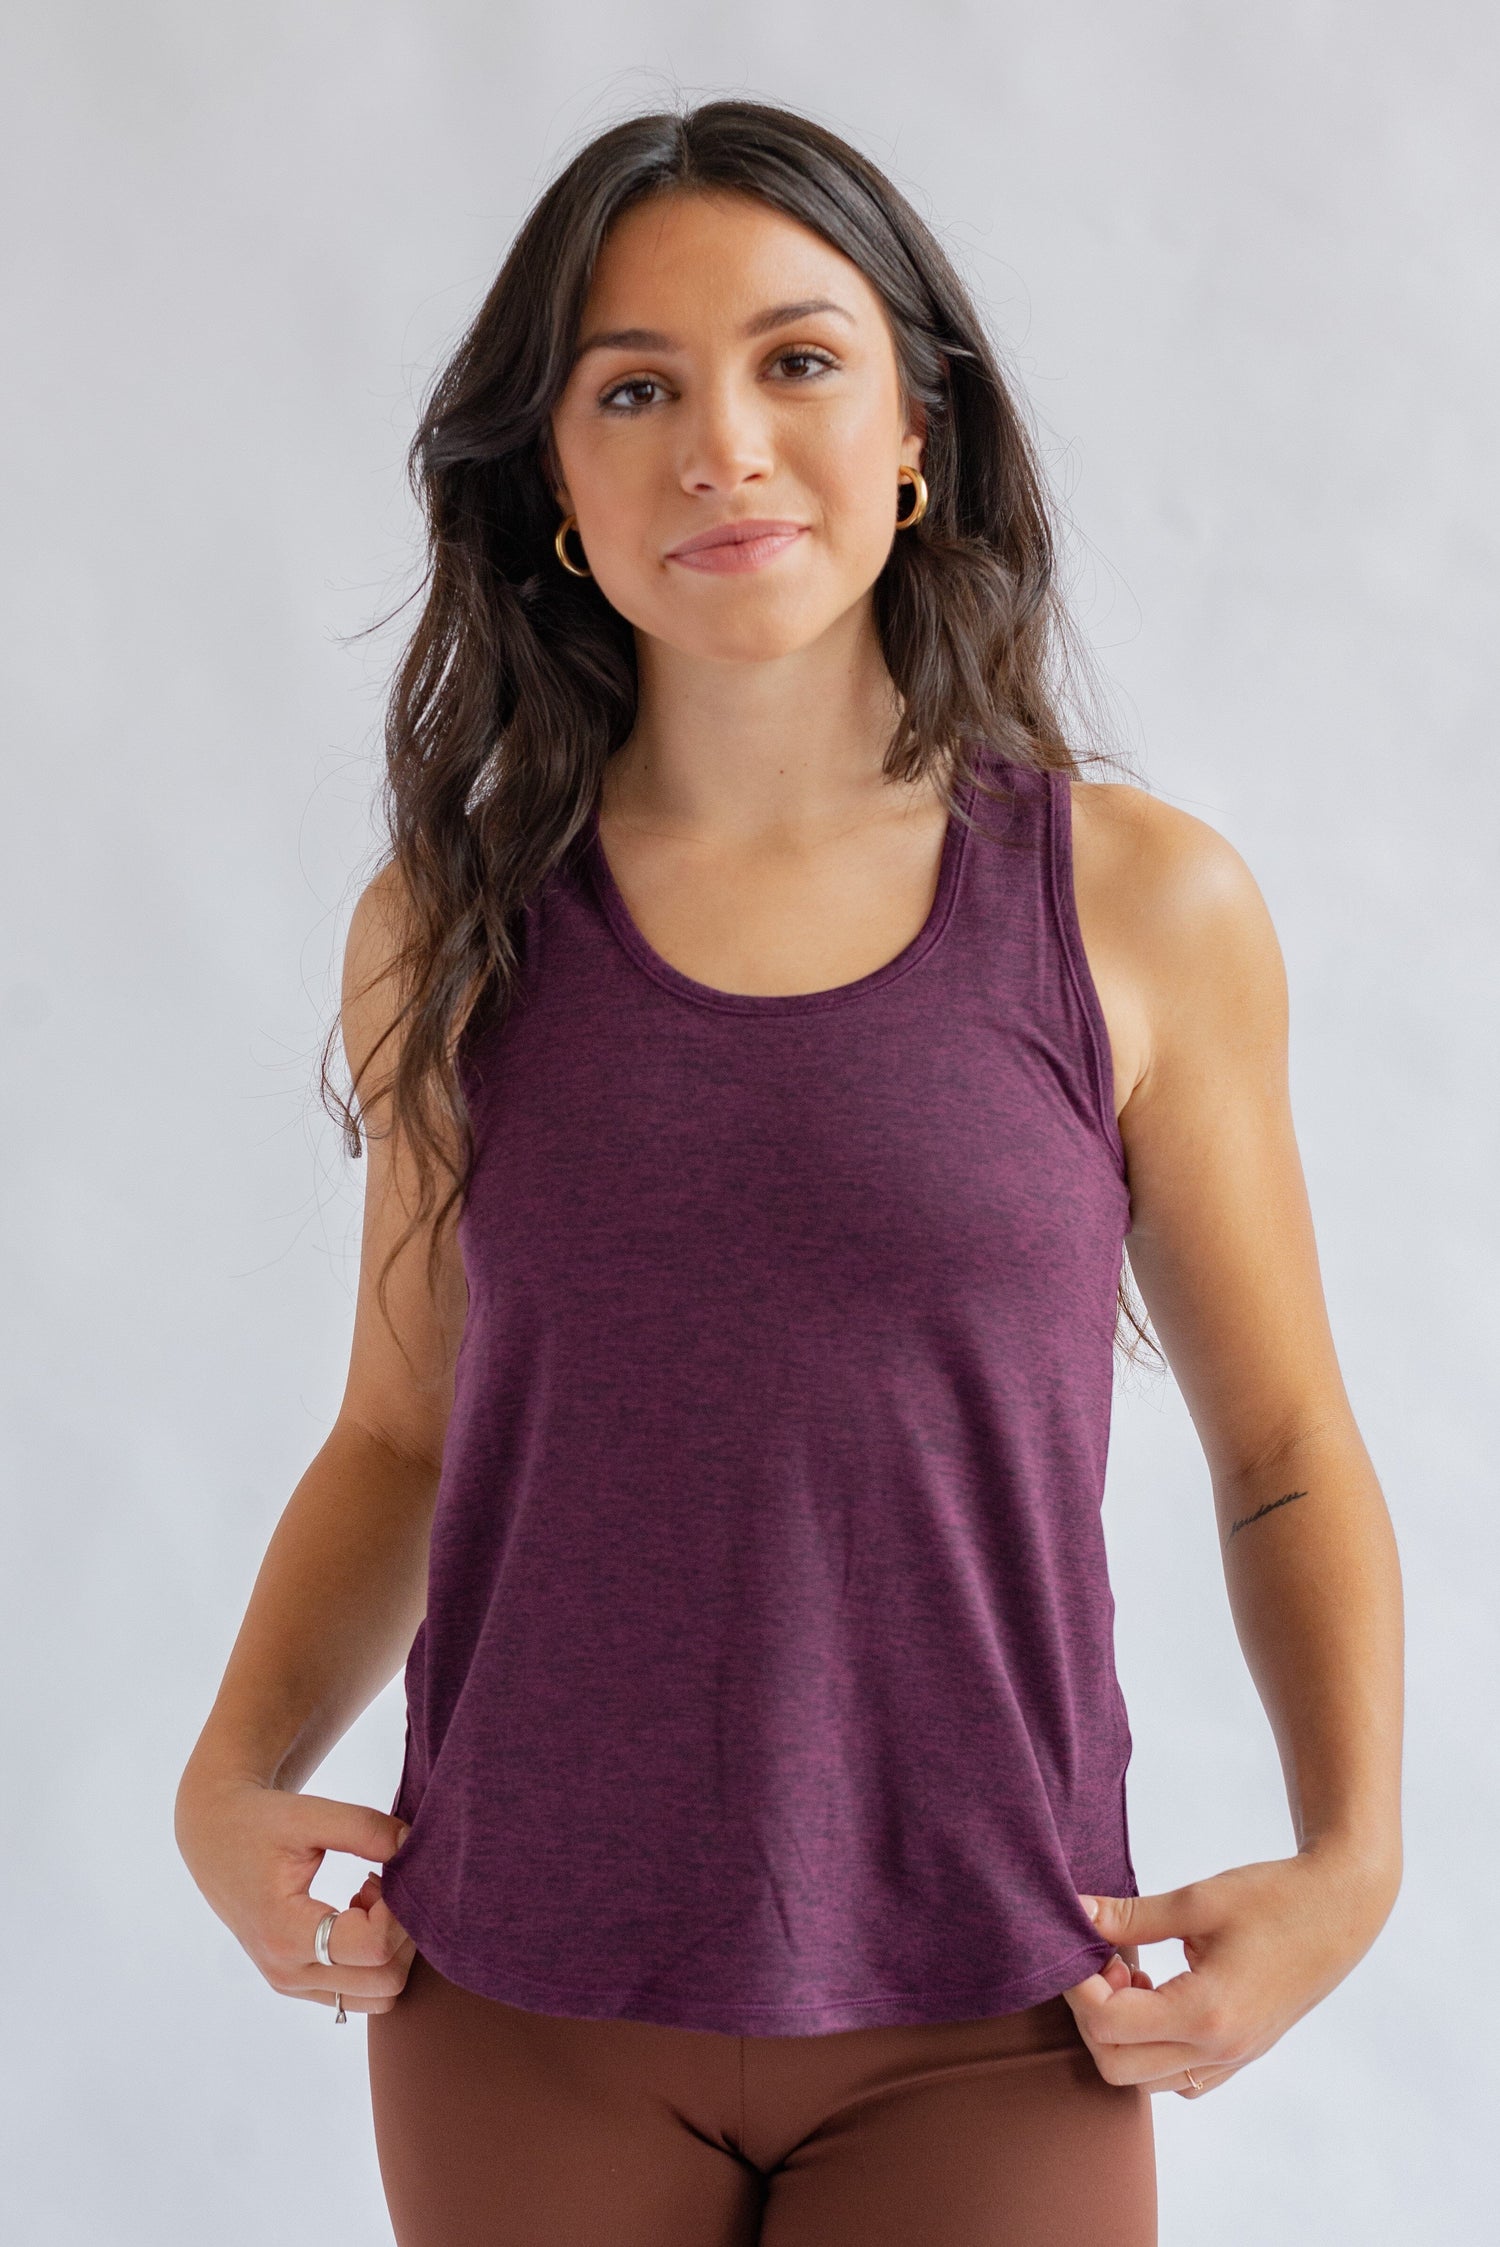 Girlfriend Collective - Train Relaxed Tank - Made from Recycled PET - Weekendbee - sustainable sportswear